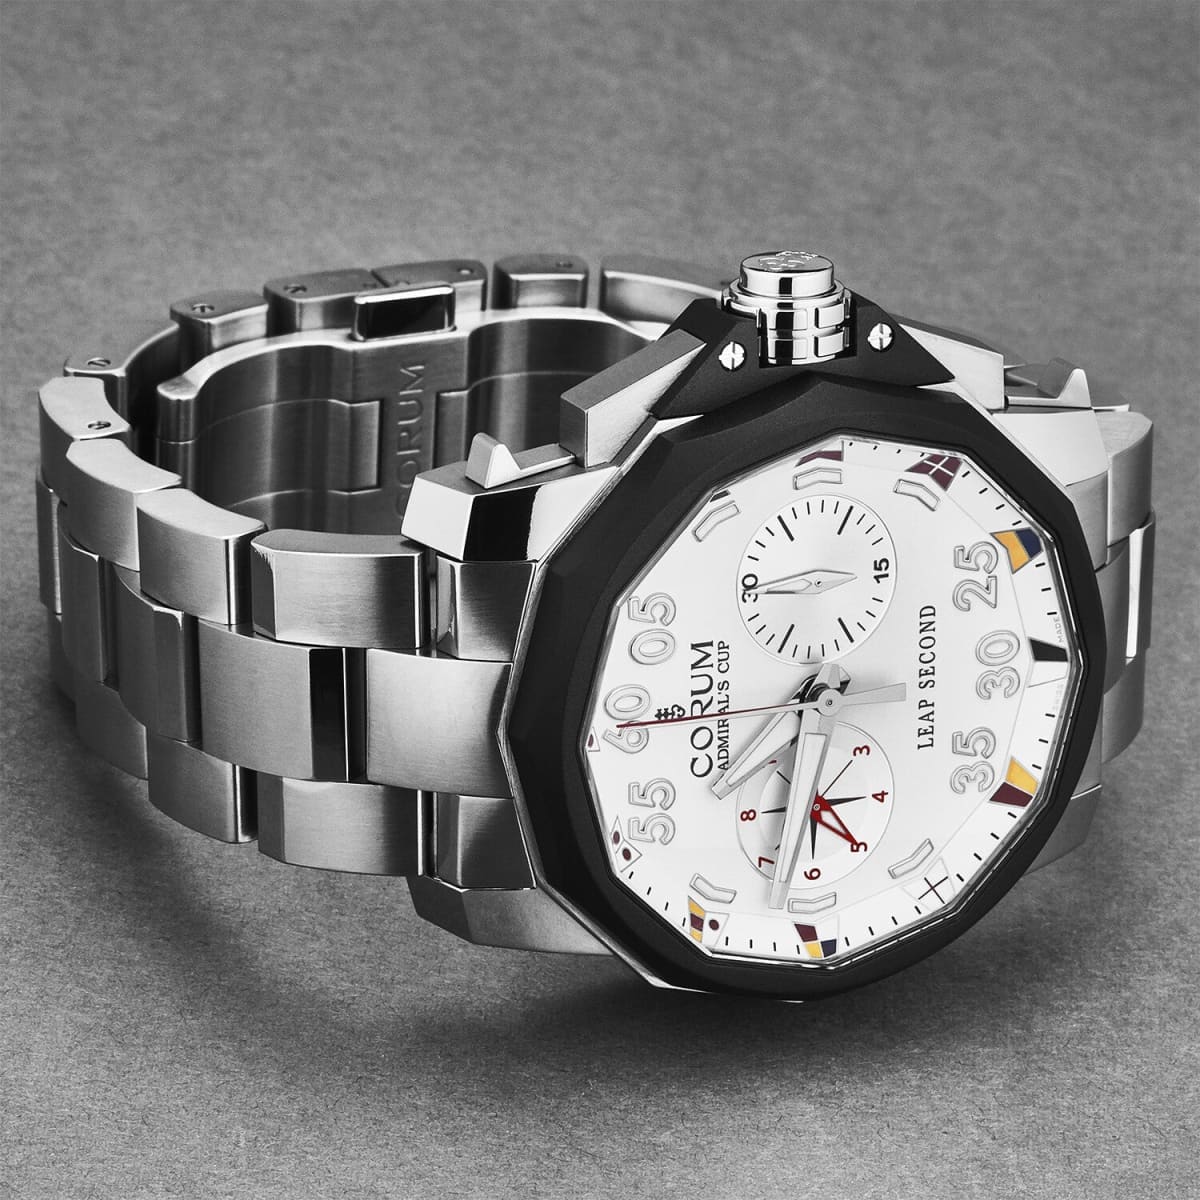 Corum Men’s ’Admiral Cup’ White Dial Stainless Steel Bracelet Titanium Leap Second Chronograph Automatic Watch 